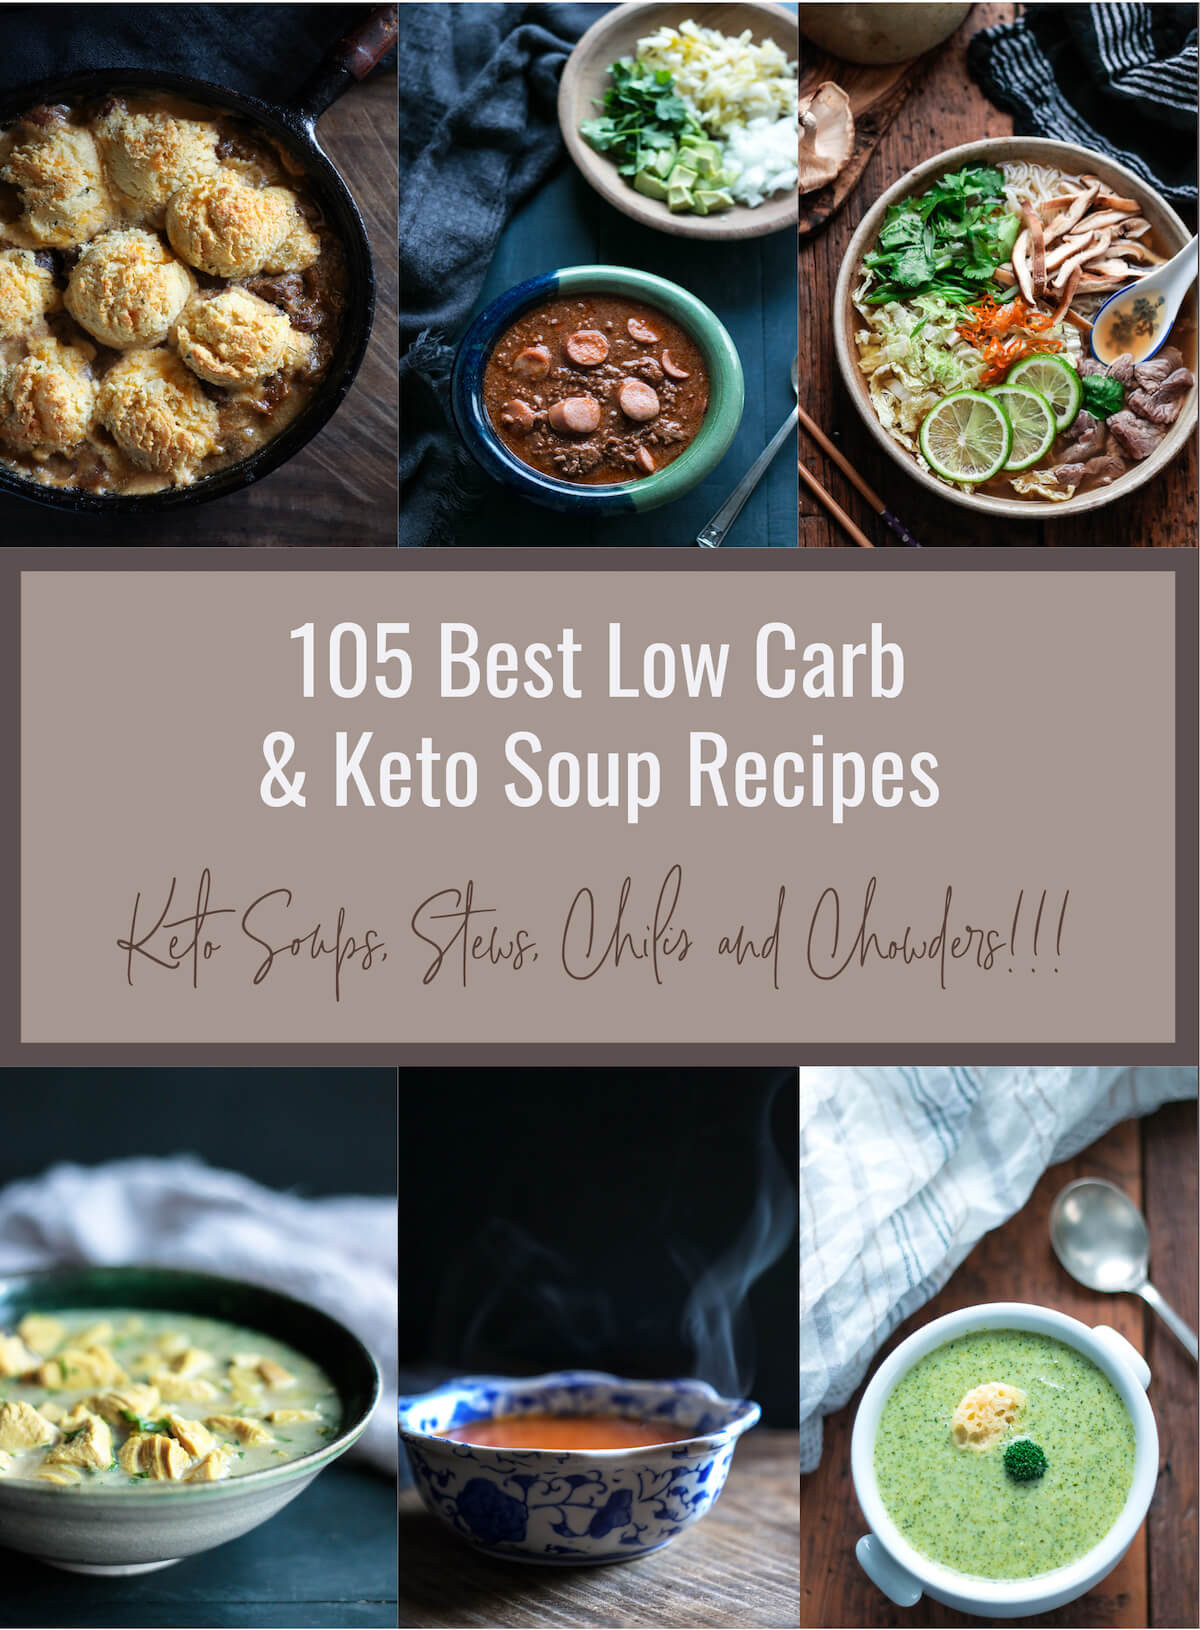 Low Carb Fall Recipes
 10 Best Low Carb Soup Recipes for Fall IBIH